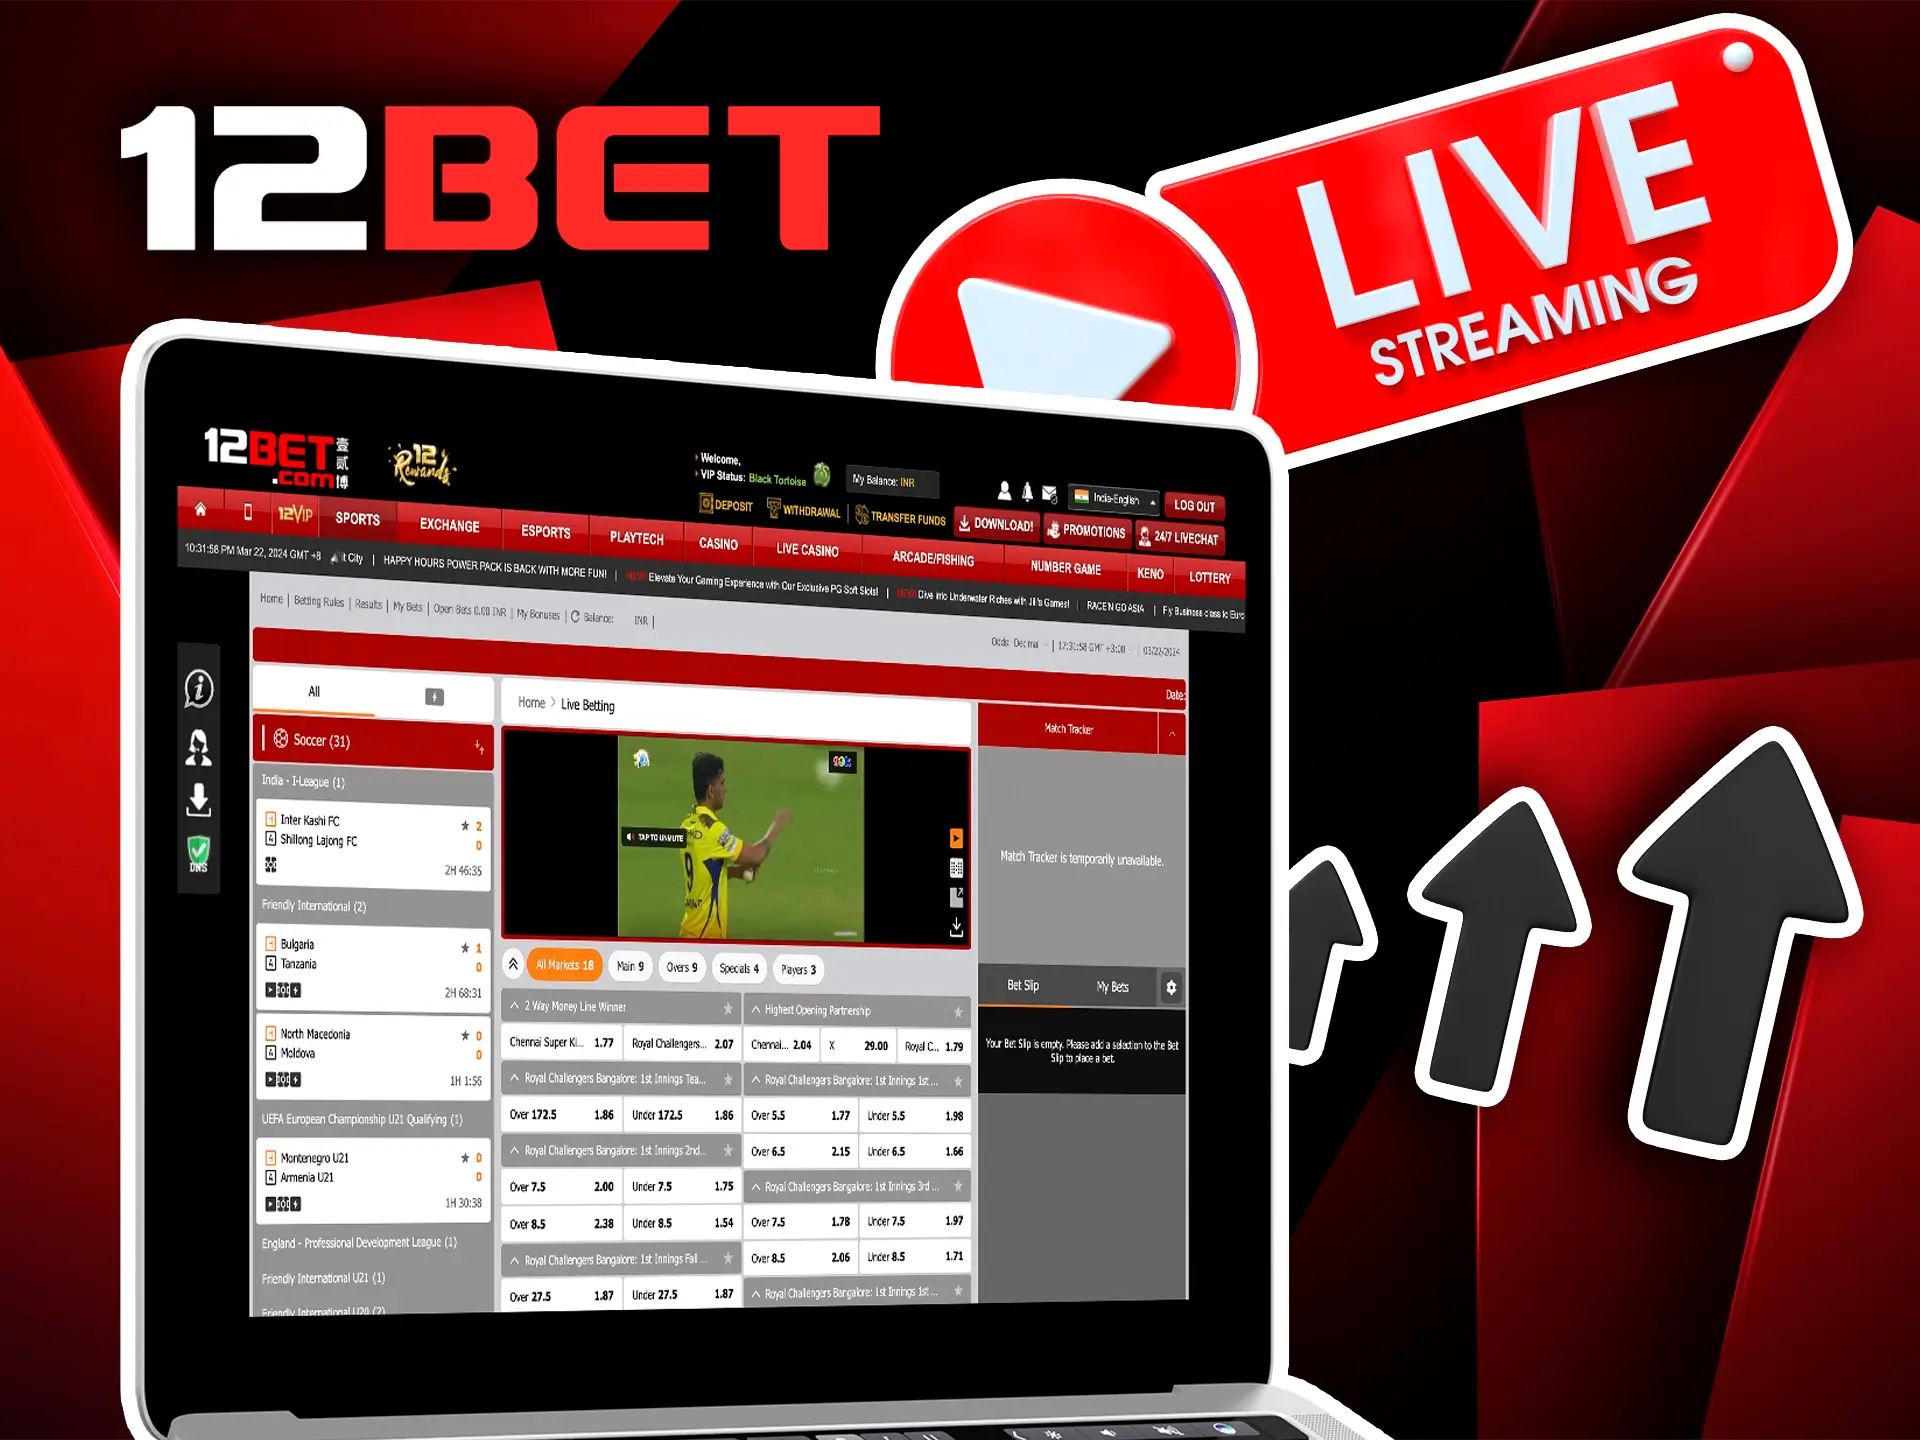 Study team positions and statistics online and make the right decision when betting at 12Bet.